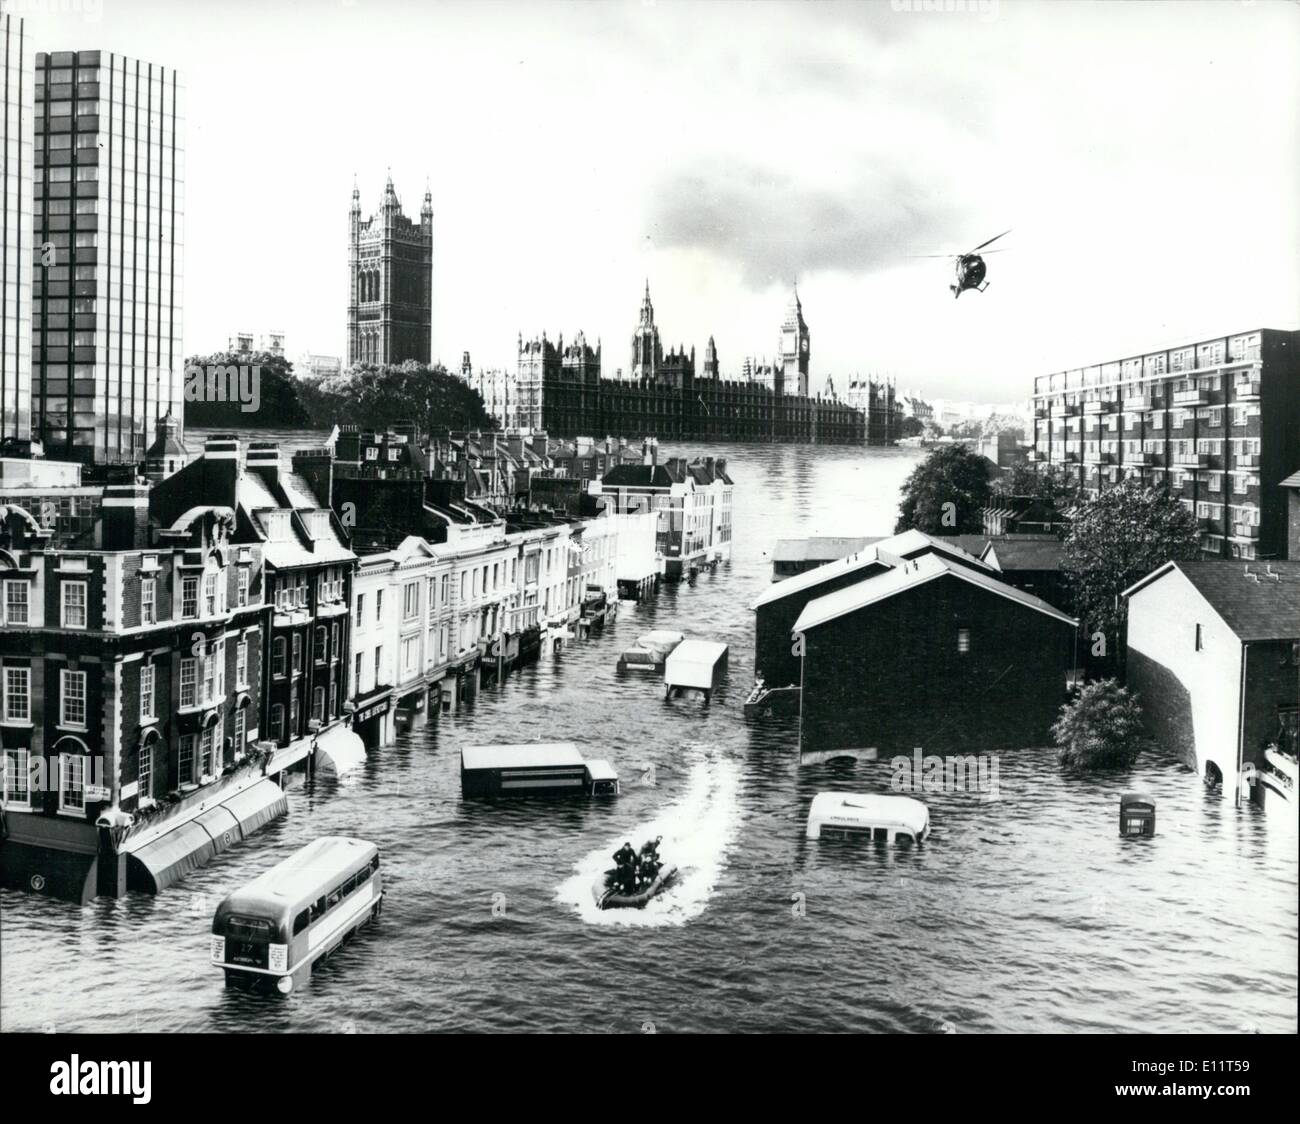 Nov. 11, 1979 - London Flood Warning: An Impression of What London would look like if the River Thames overflowed. a Major publicitly campaign costing &pound;100,000 is being launched by the Greater London Council tis week to warn Londoners about the danger of the Thames flooding. Stock Photo